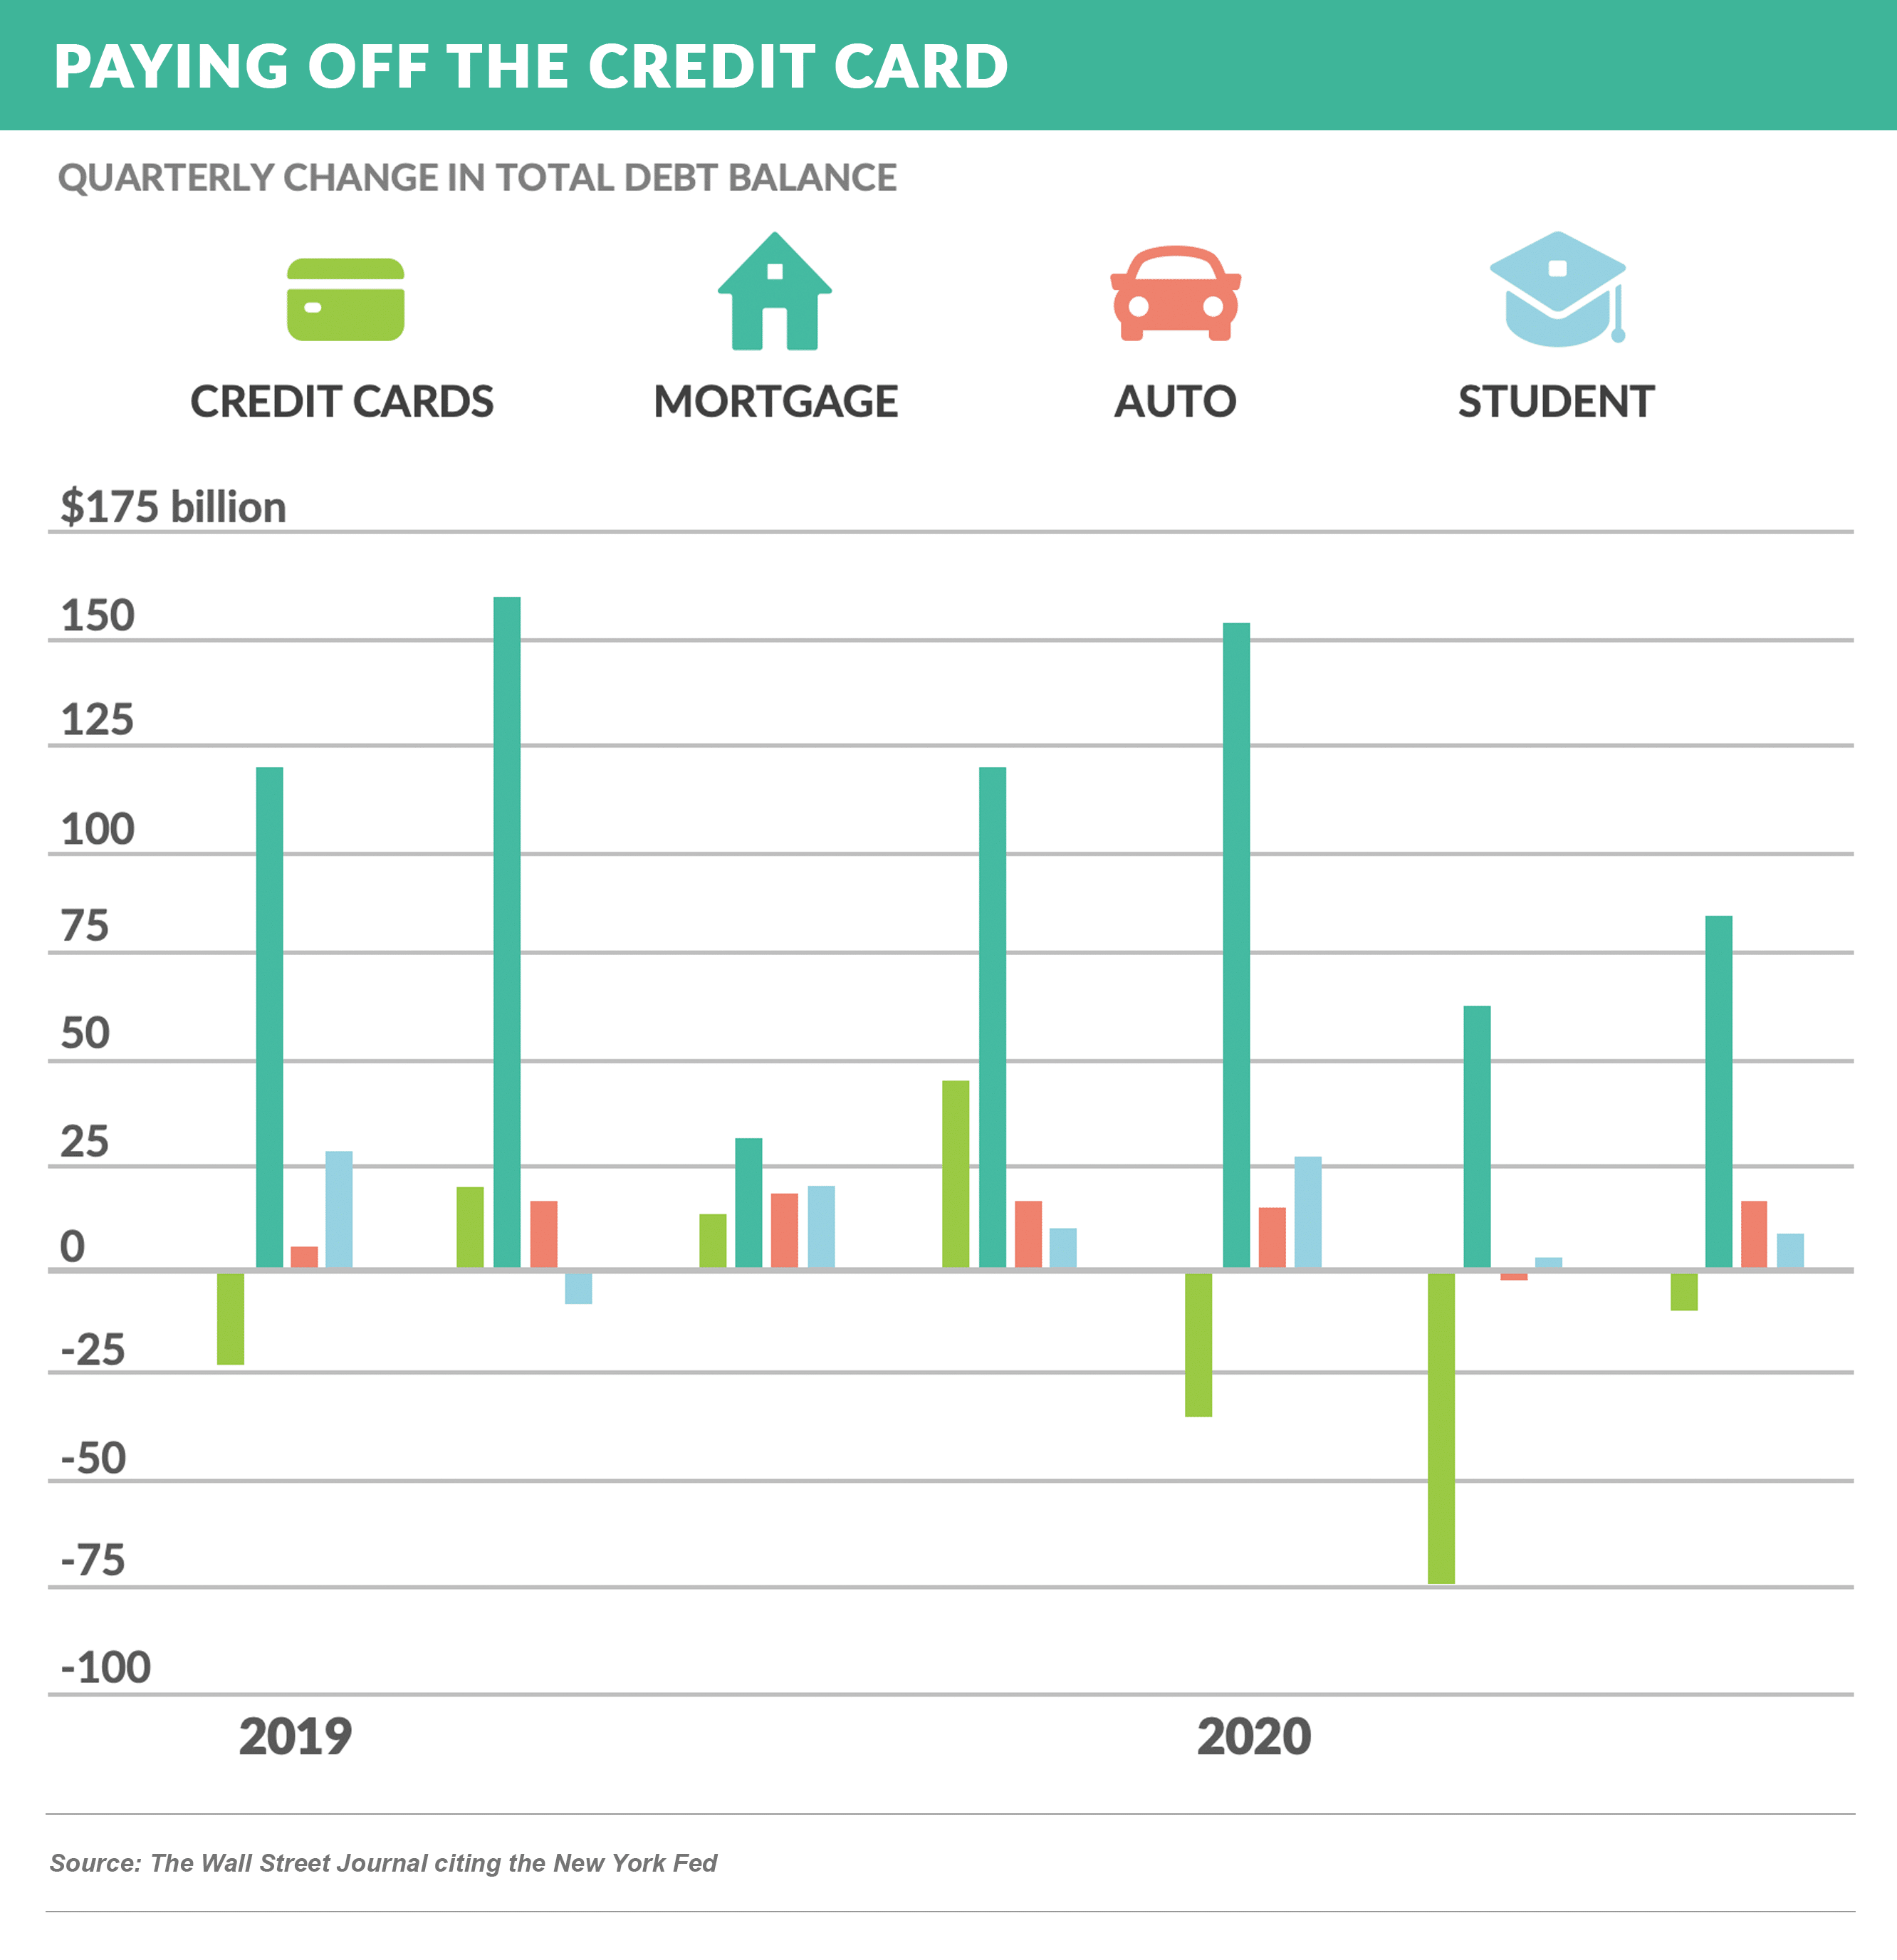 Paying Off the Credit Card - Quarterly Change in Total Debt Balance